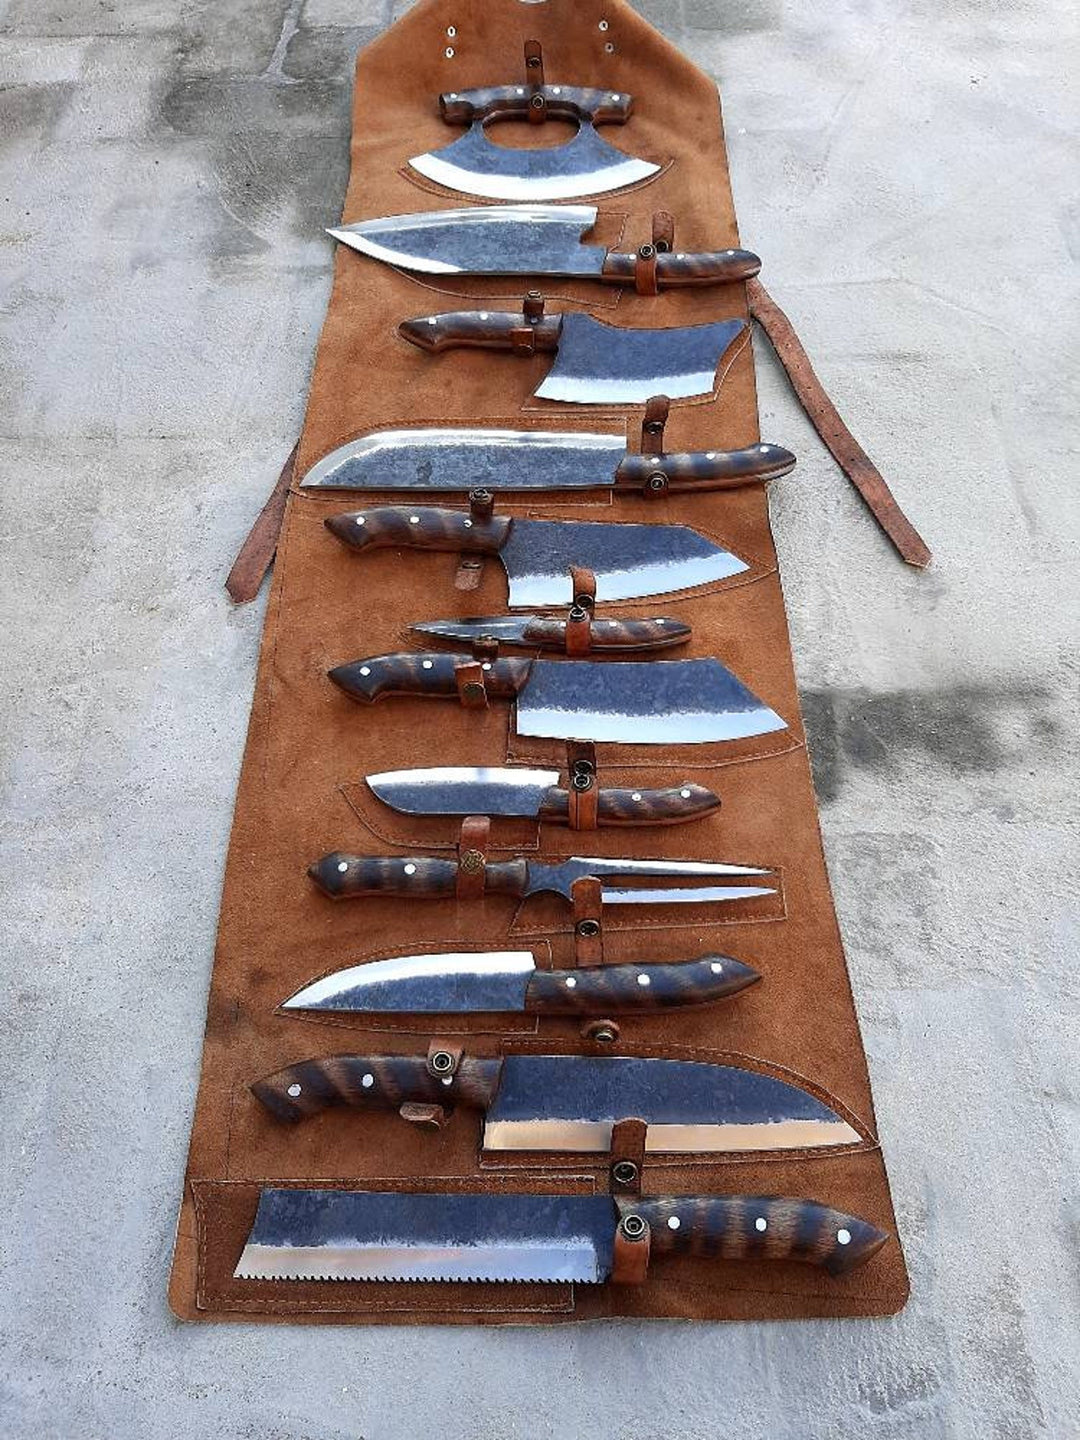 Handmade Forged High Carbon Steel Chef Knife Set